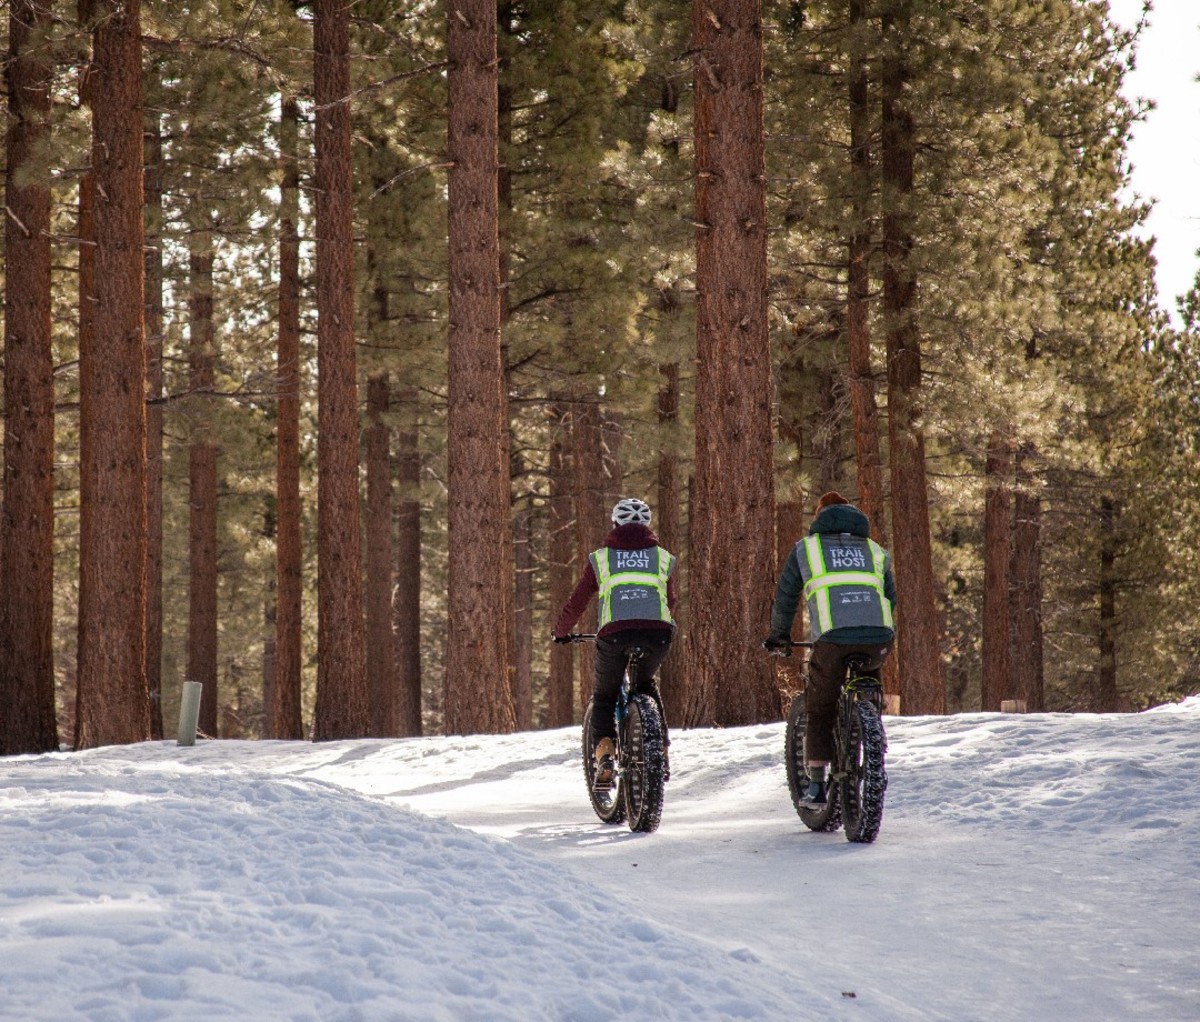 Two trail hosts on fat bikes cycle along a snowy, pine forested trail near Mammoth Lakes, Caliofrnia